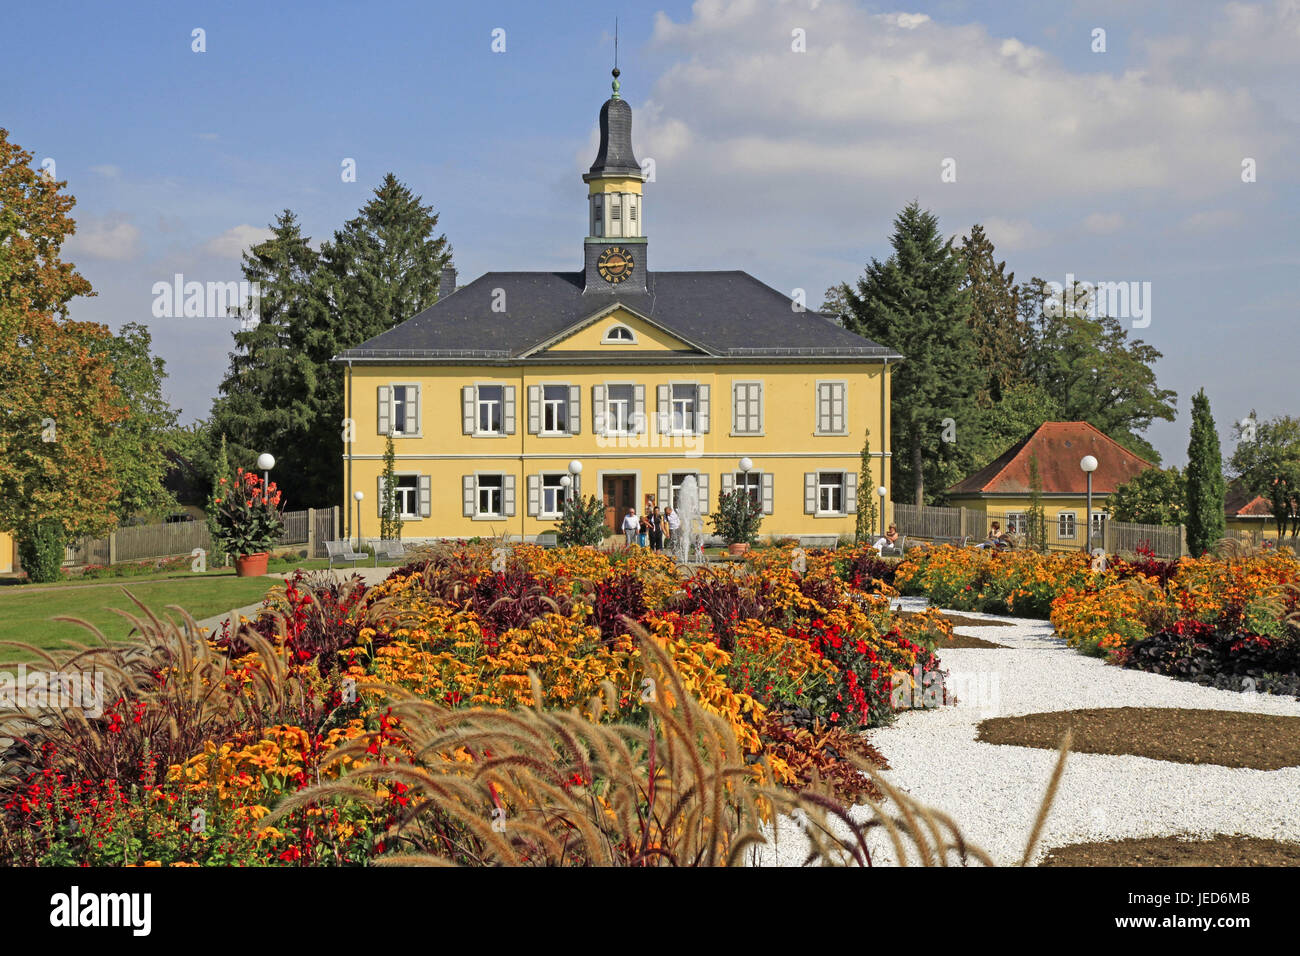 Germany, Baden-Wurttemberg, bath Rappenau, health resort park, saltworks office building, flowerbeds, house, architecture, building, yellow, garden, flowers, plants, blossom, tourists, people, tourism, saltwork office building, clock, time, Stock Photo